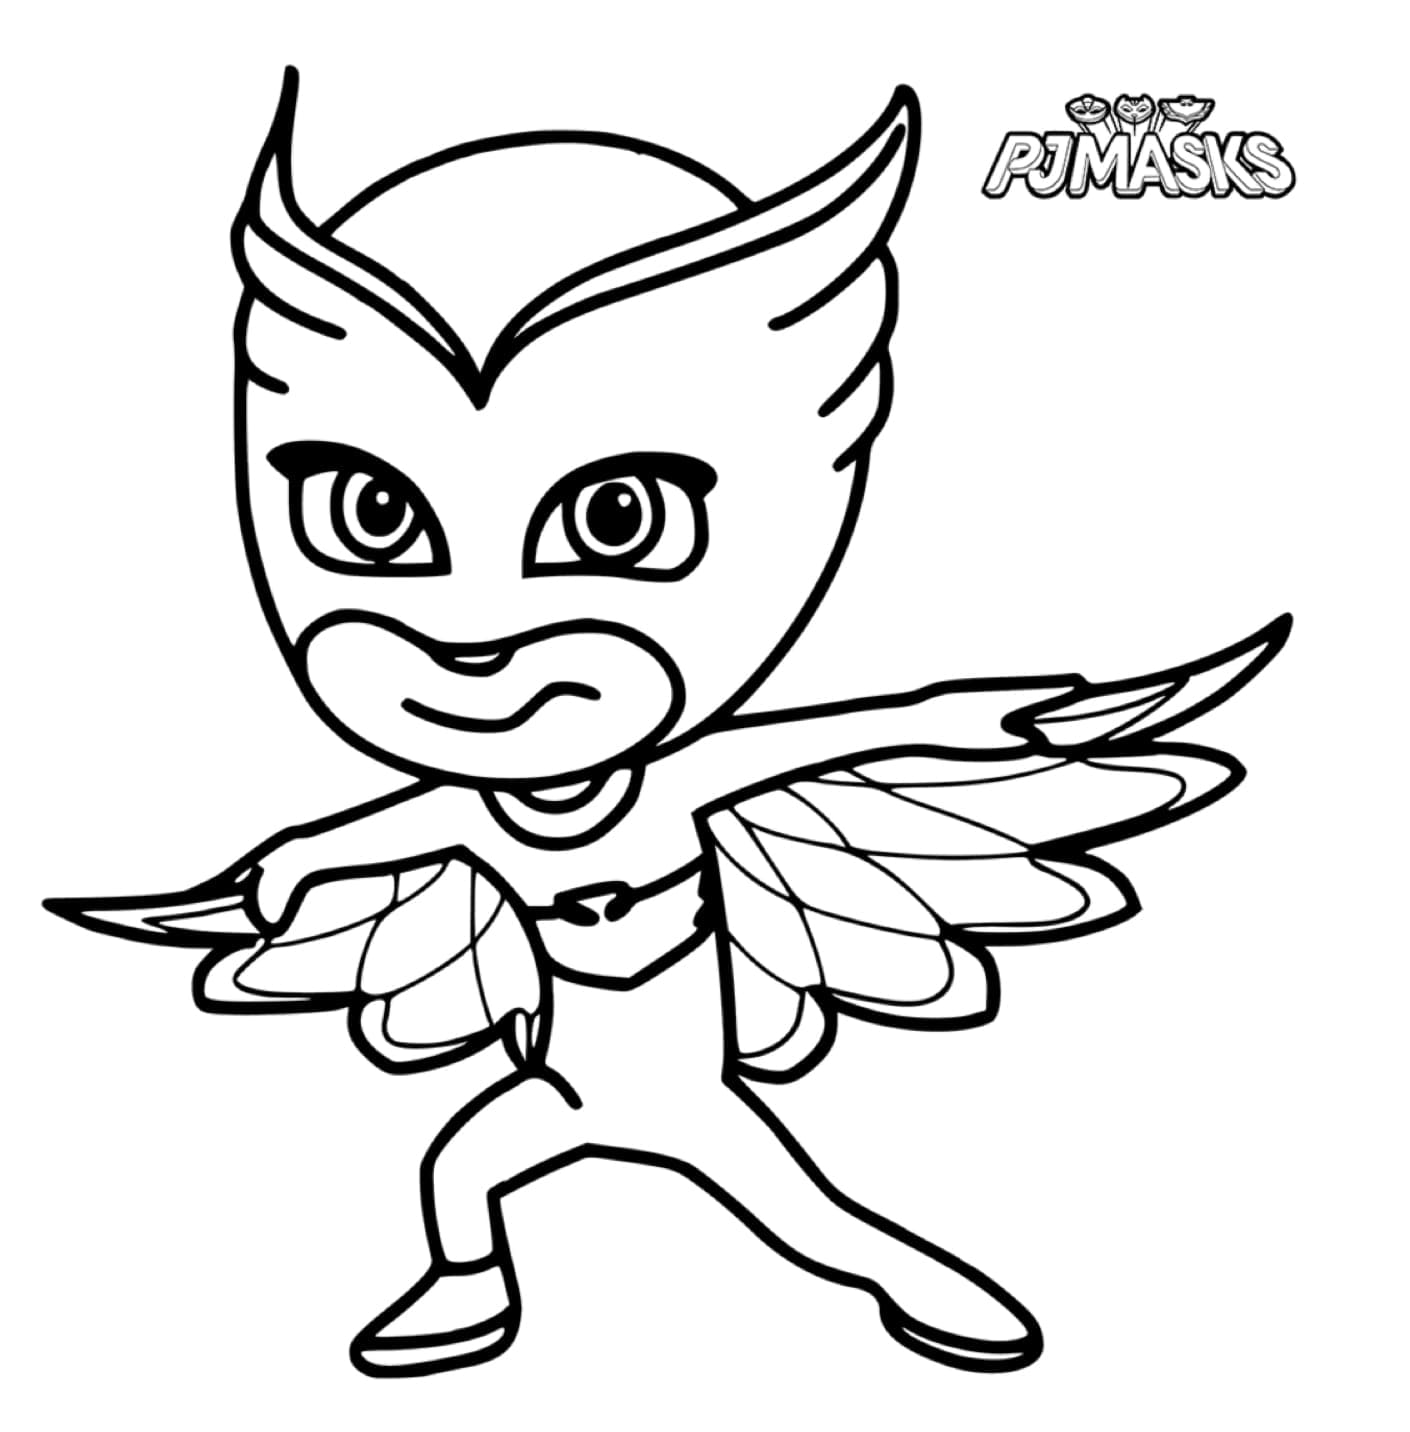 Pj masks coloring pages print for free wonder day â coloring pages for children and adults